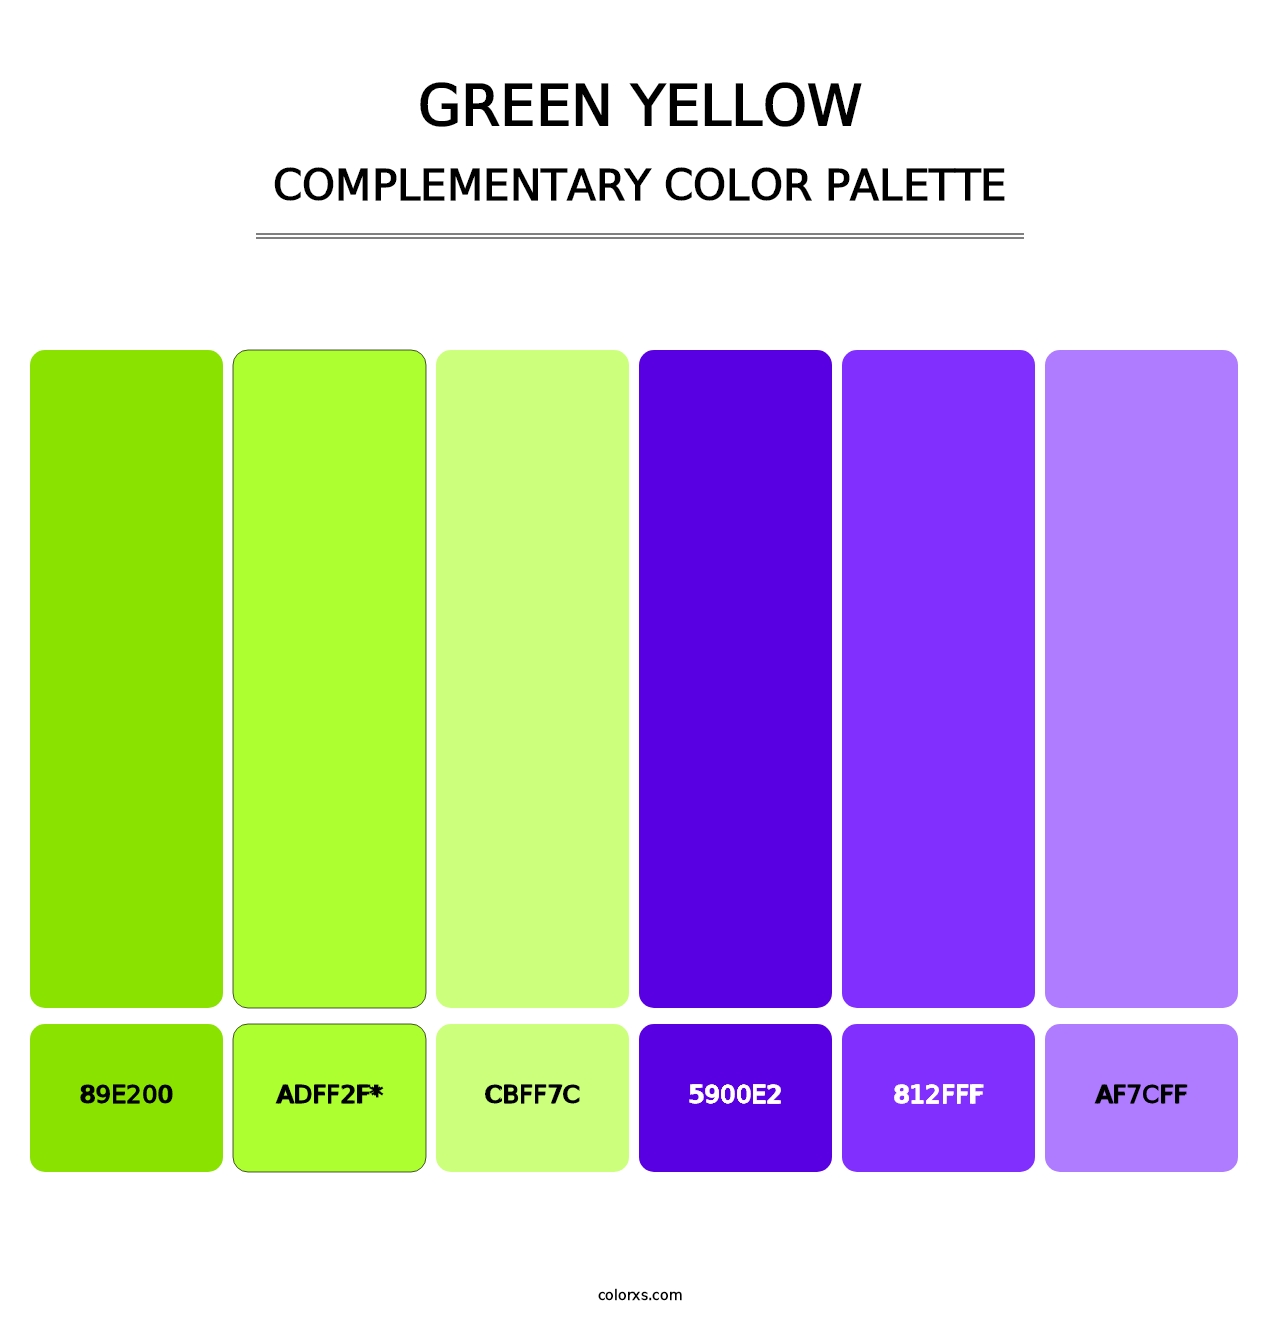 Green Yellow - Complementary Color Palette